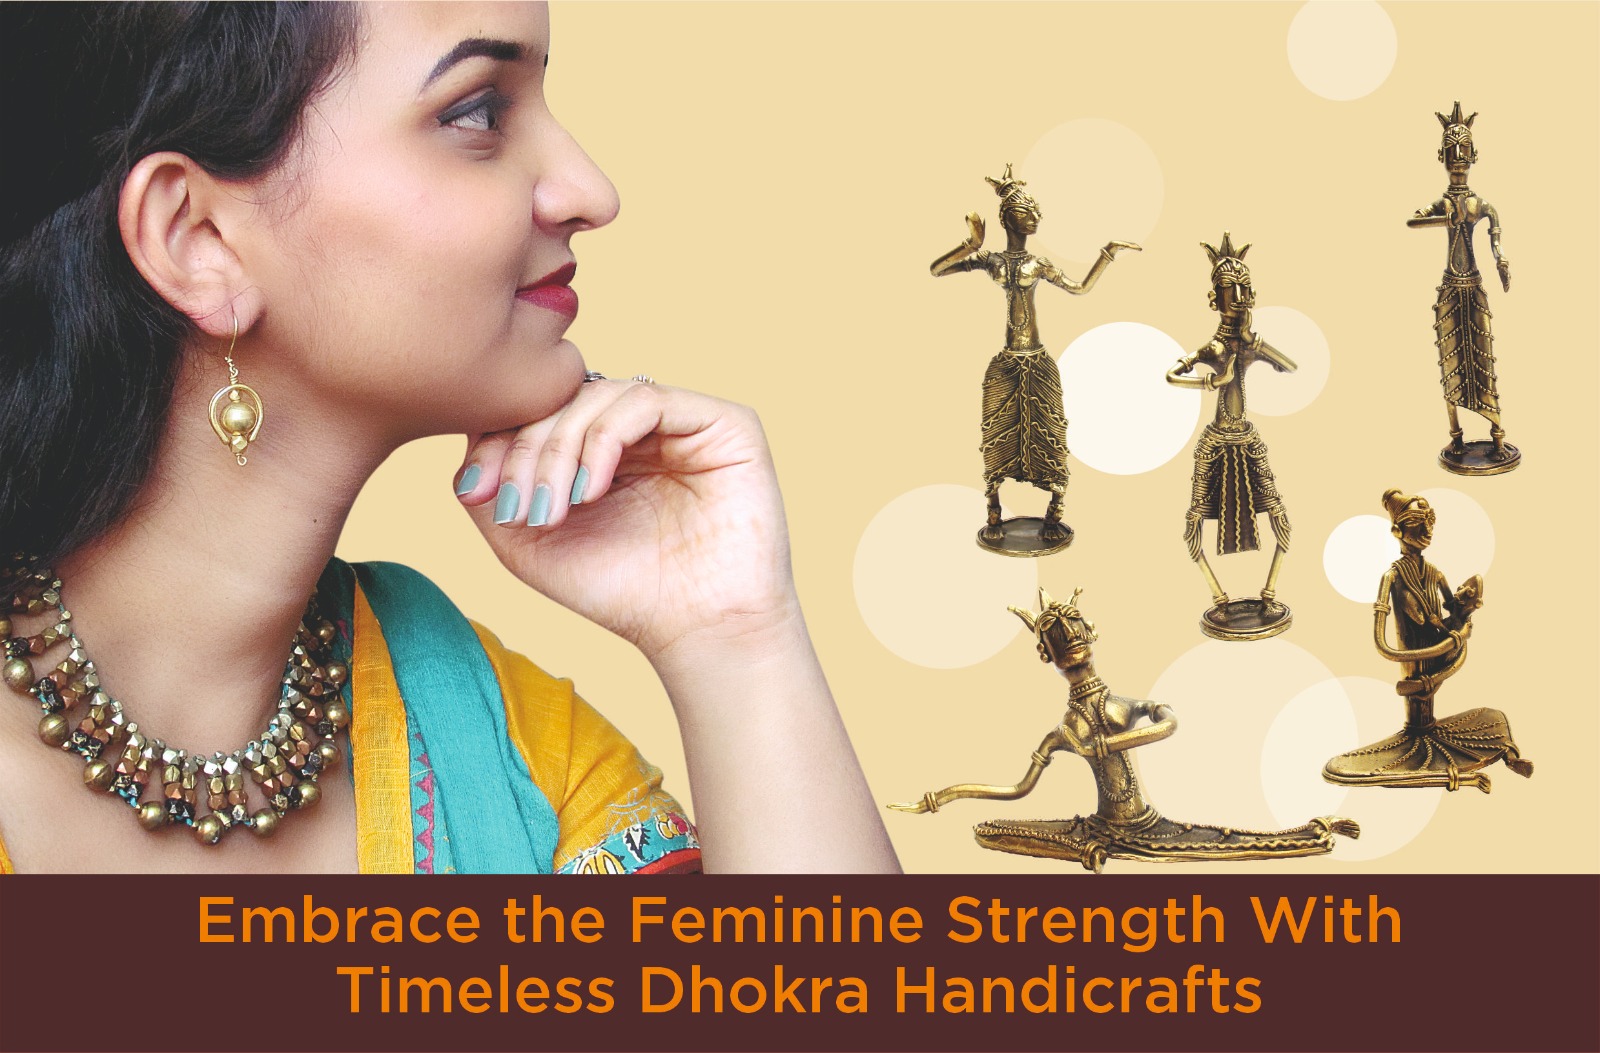 Embrace the Feminine Strength With Timeless Dhokra Handicrafts